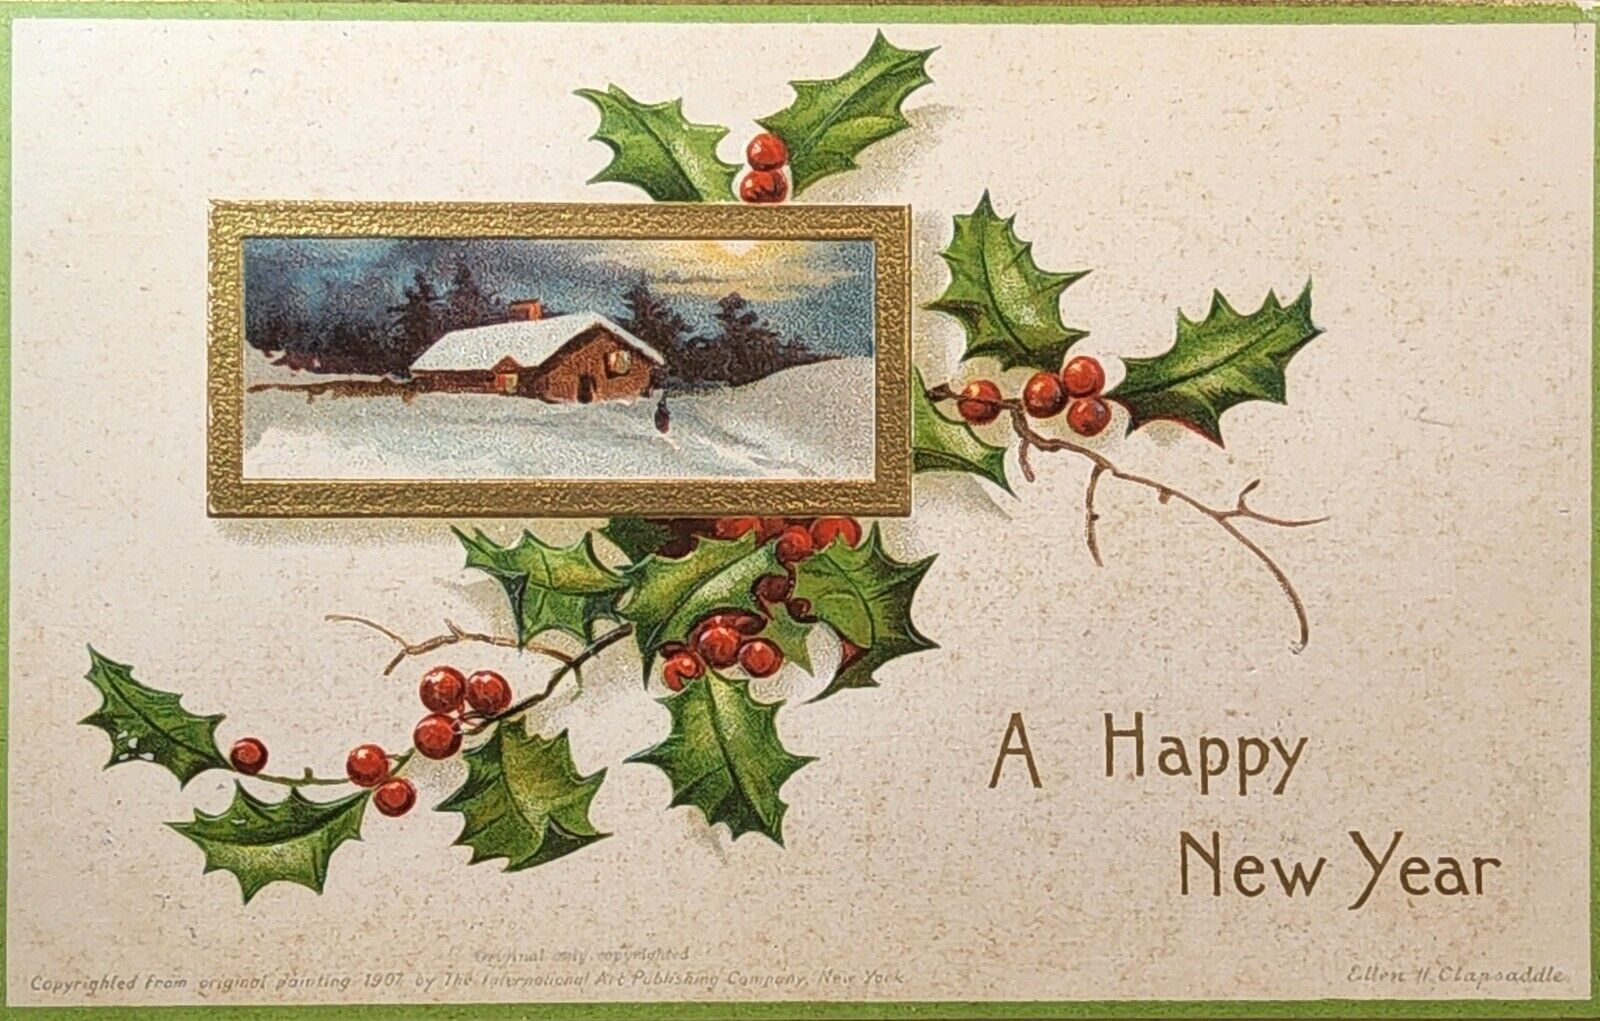 c1907 A Happy New Year Greetings Postcard ~ Artist: E. Clapsaddle ~ #-4840